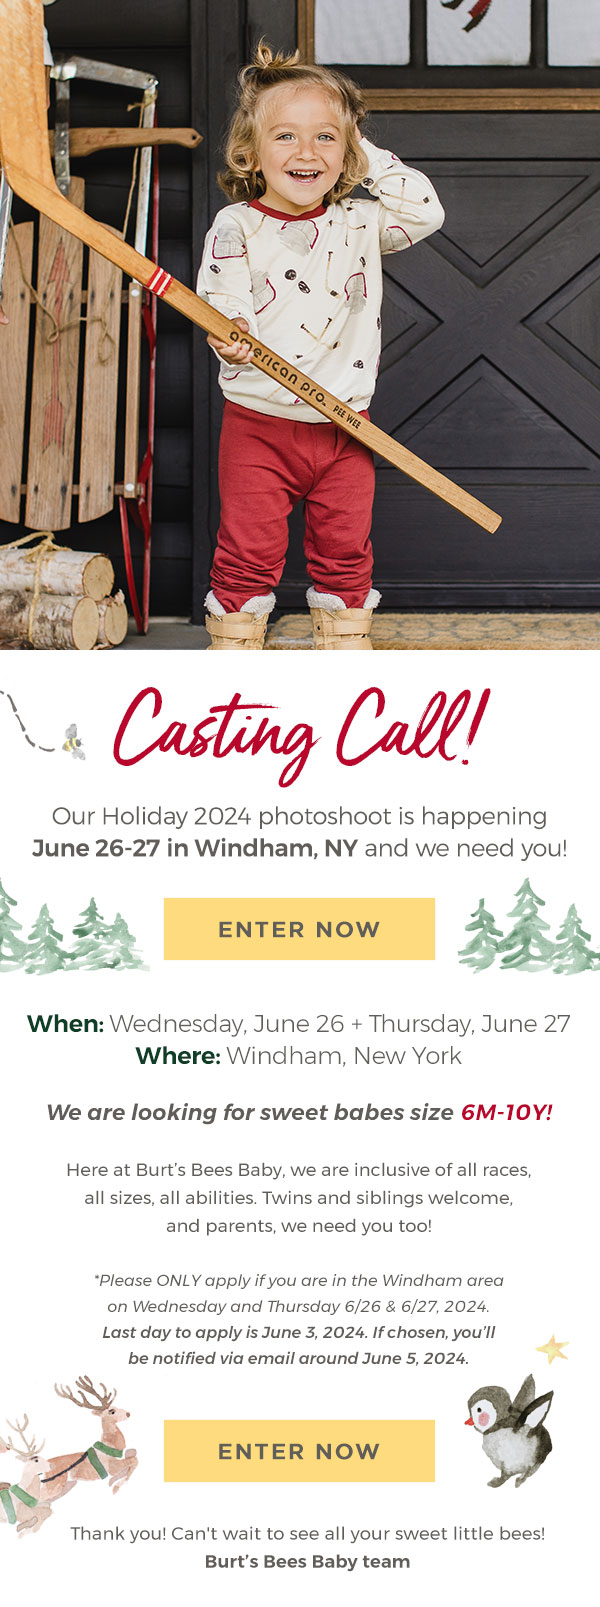 Casting Call in Windham, NY!